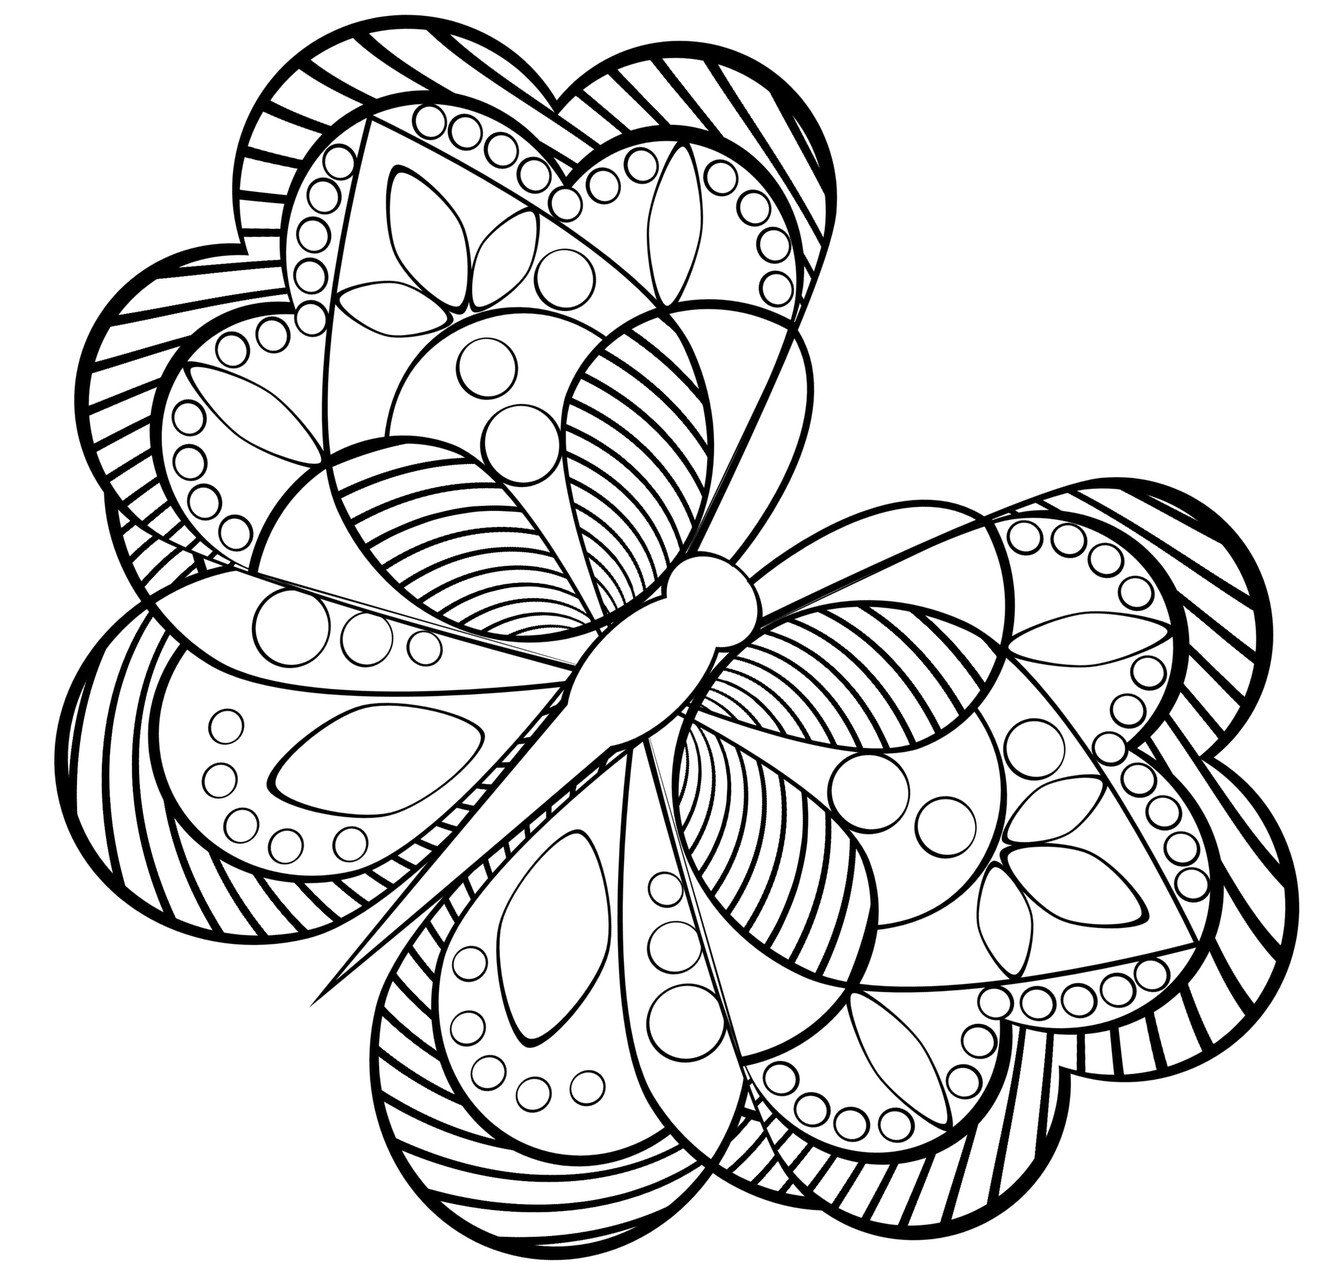 Advanced Coloring Pages
 printable advanced coloring pages for adults gianfreda